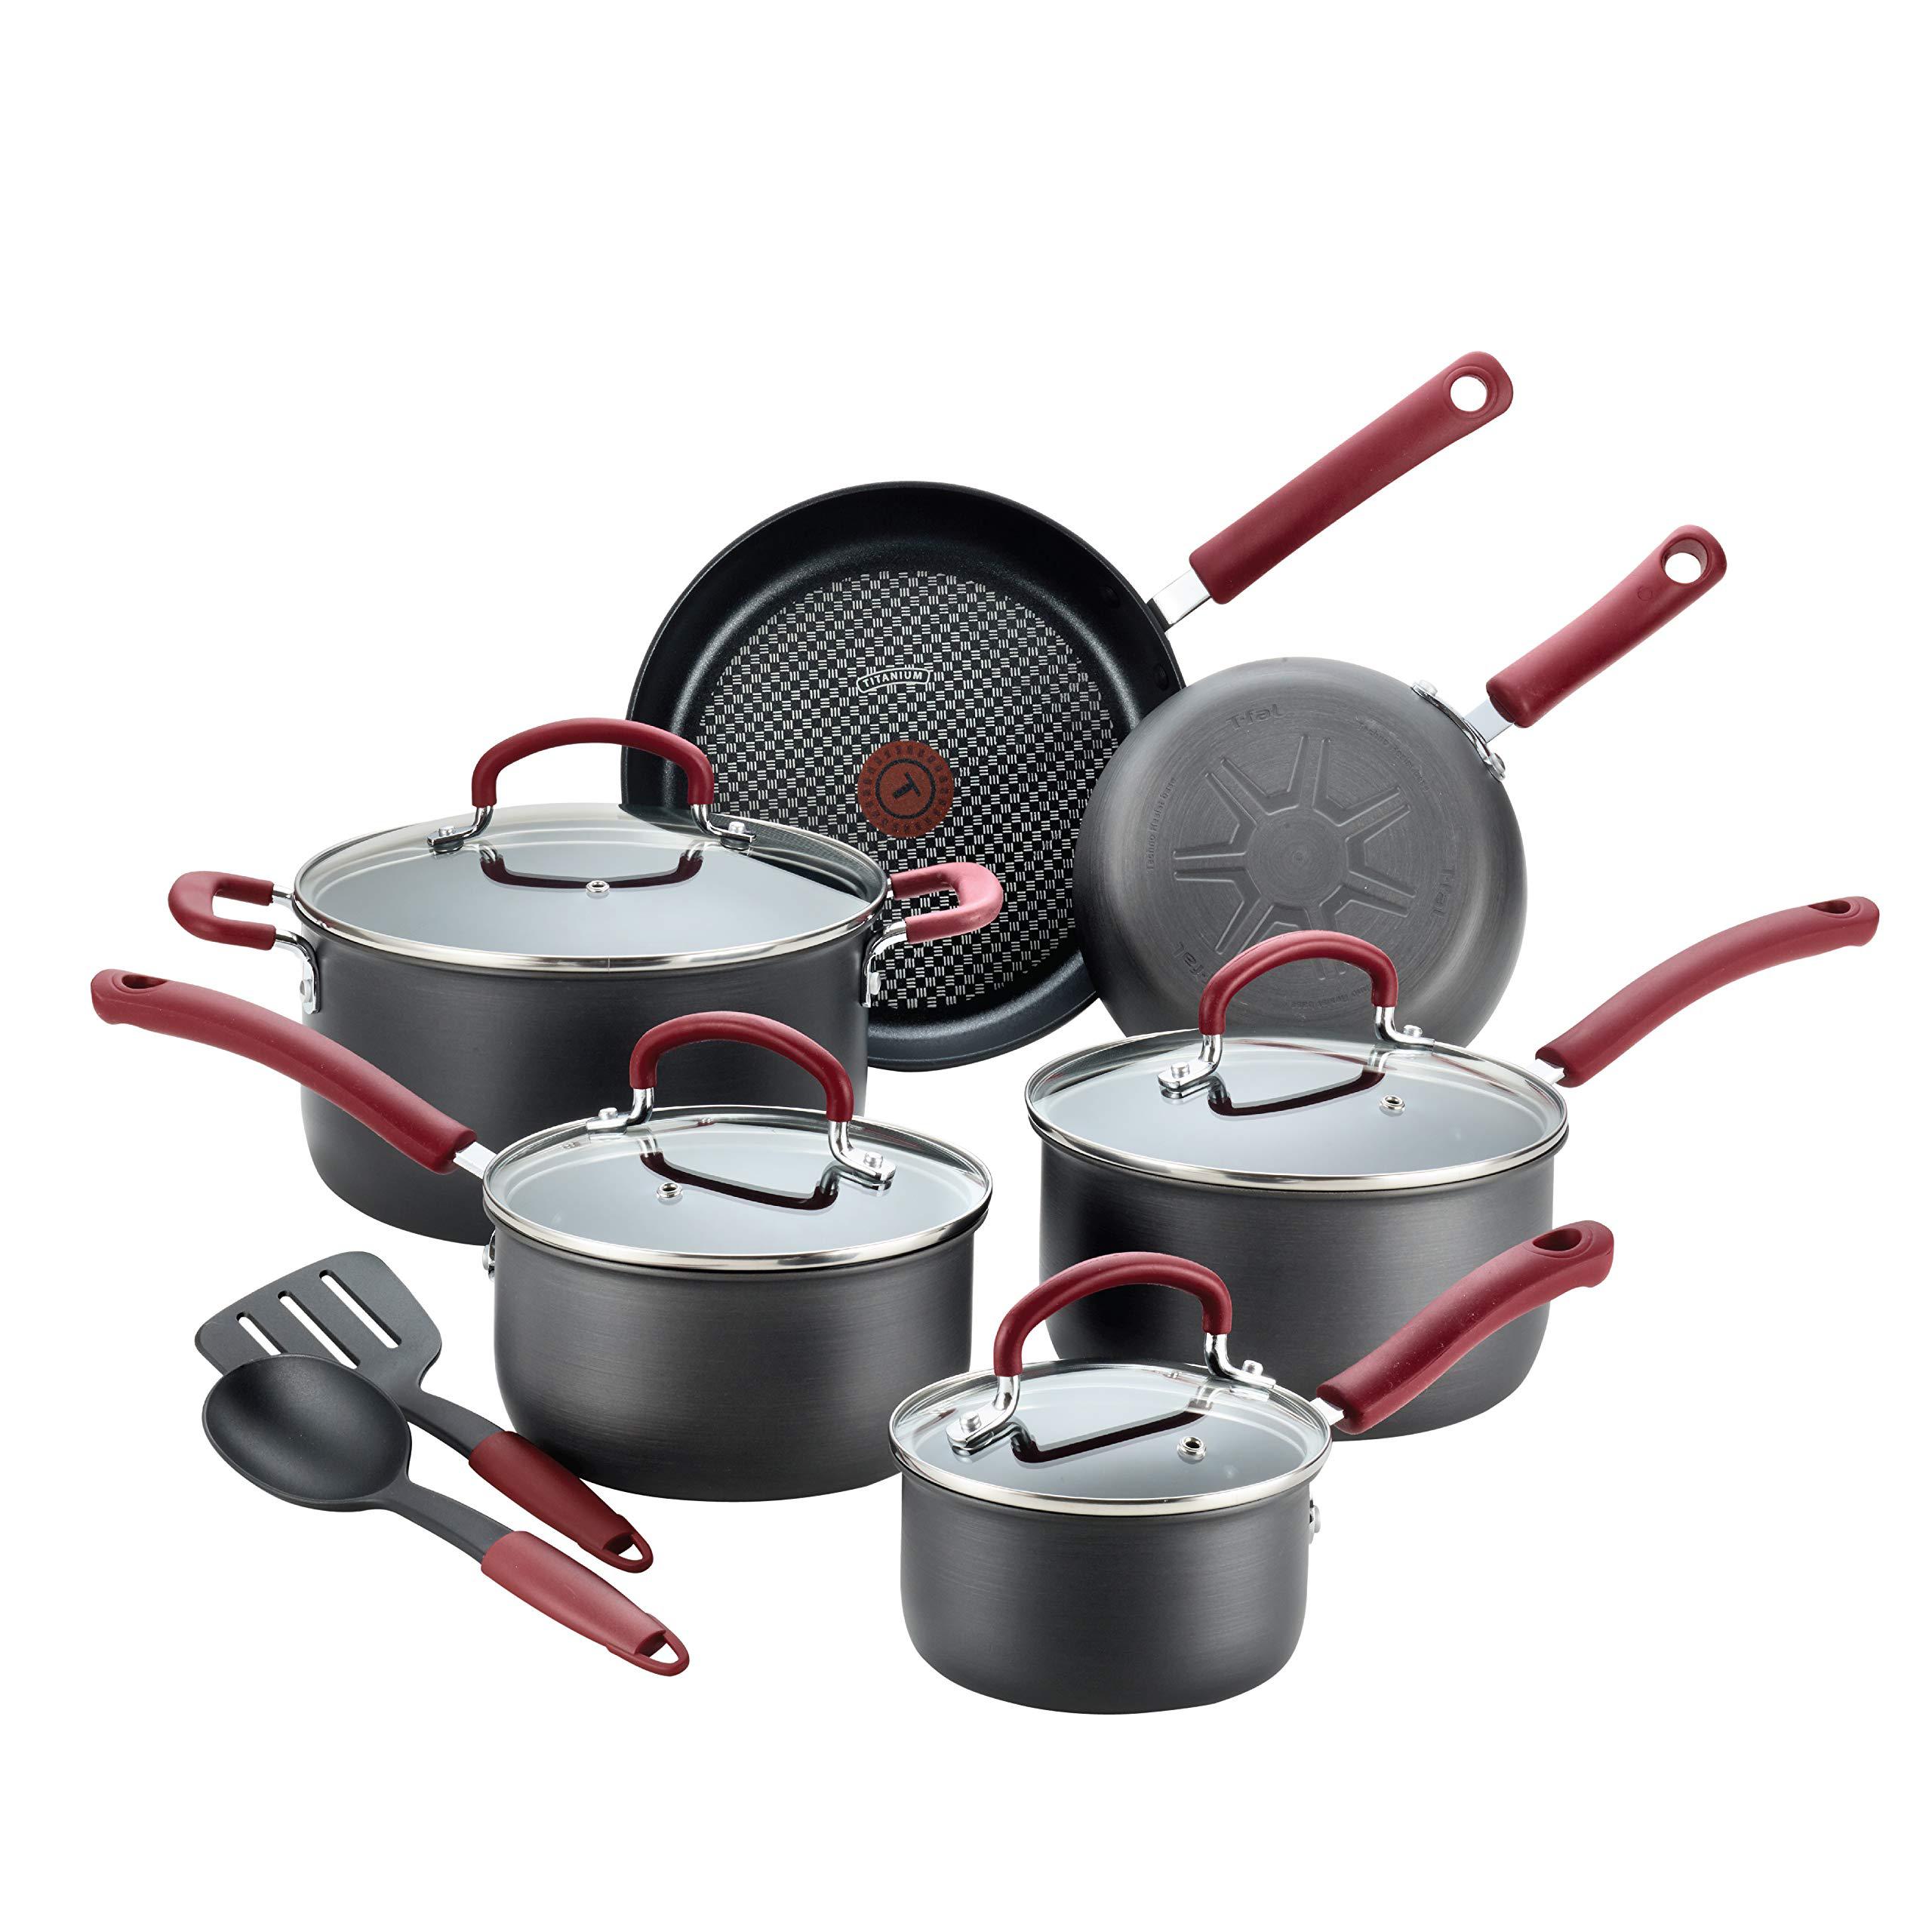 T-Fal Ultimate Hard Anodized Dishwasher Safe Nonstick Cookware Set, 12-Piece, Red